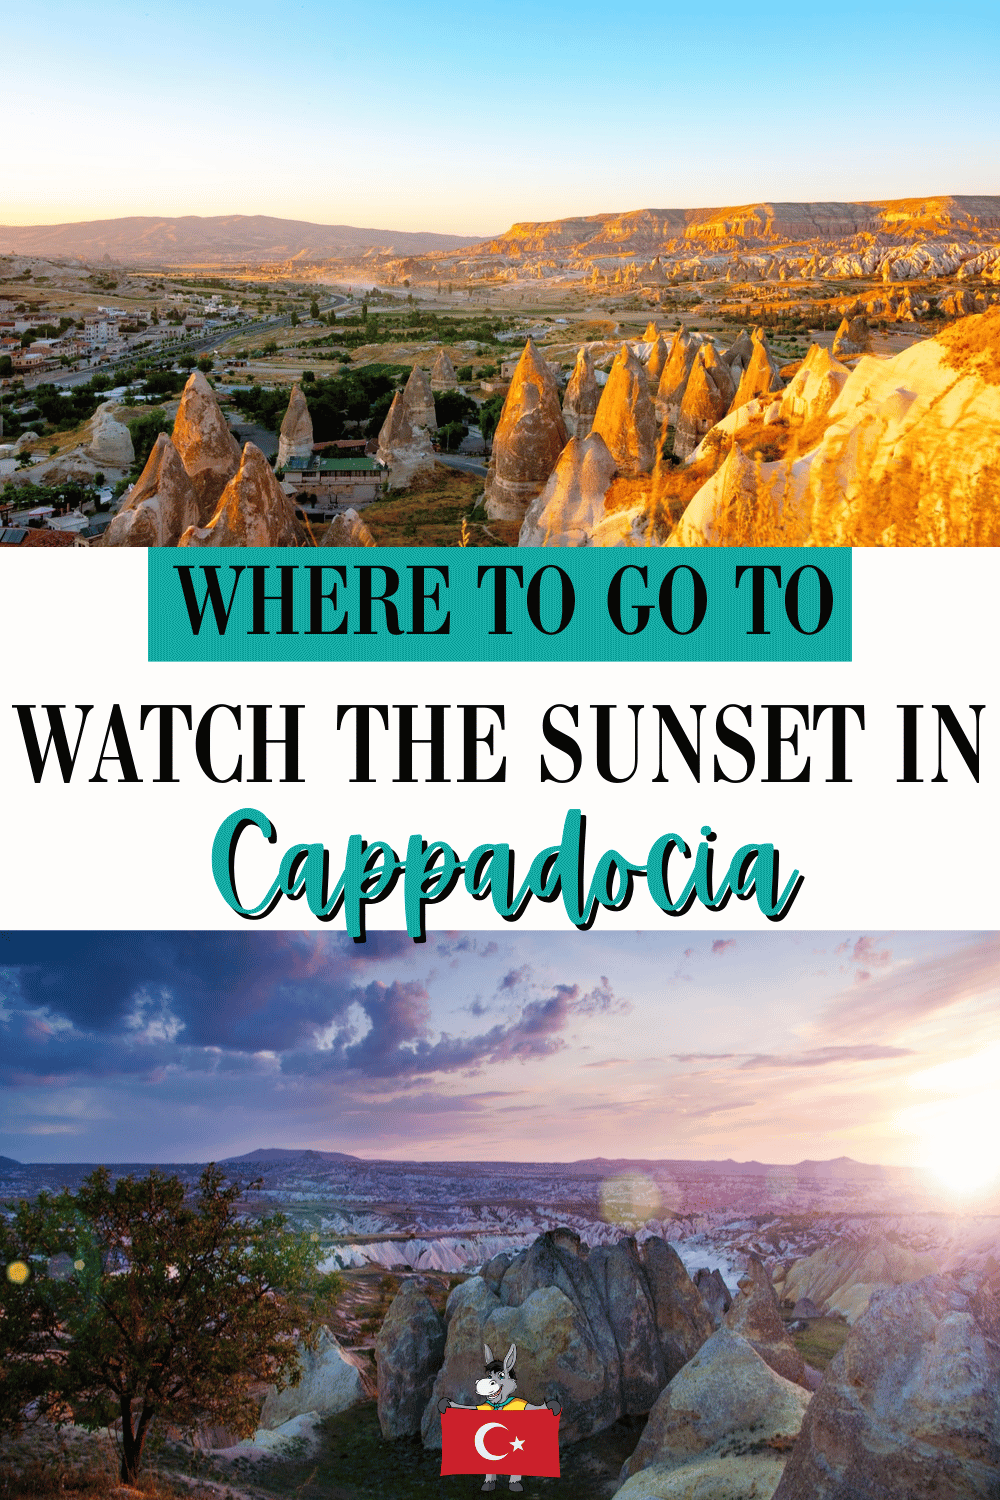 Turkey Travel Blog_Where To Watch The Sunset In Cappadocia